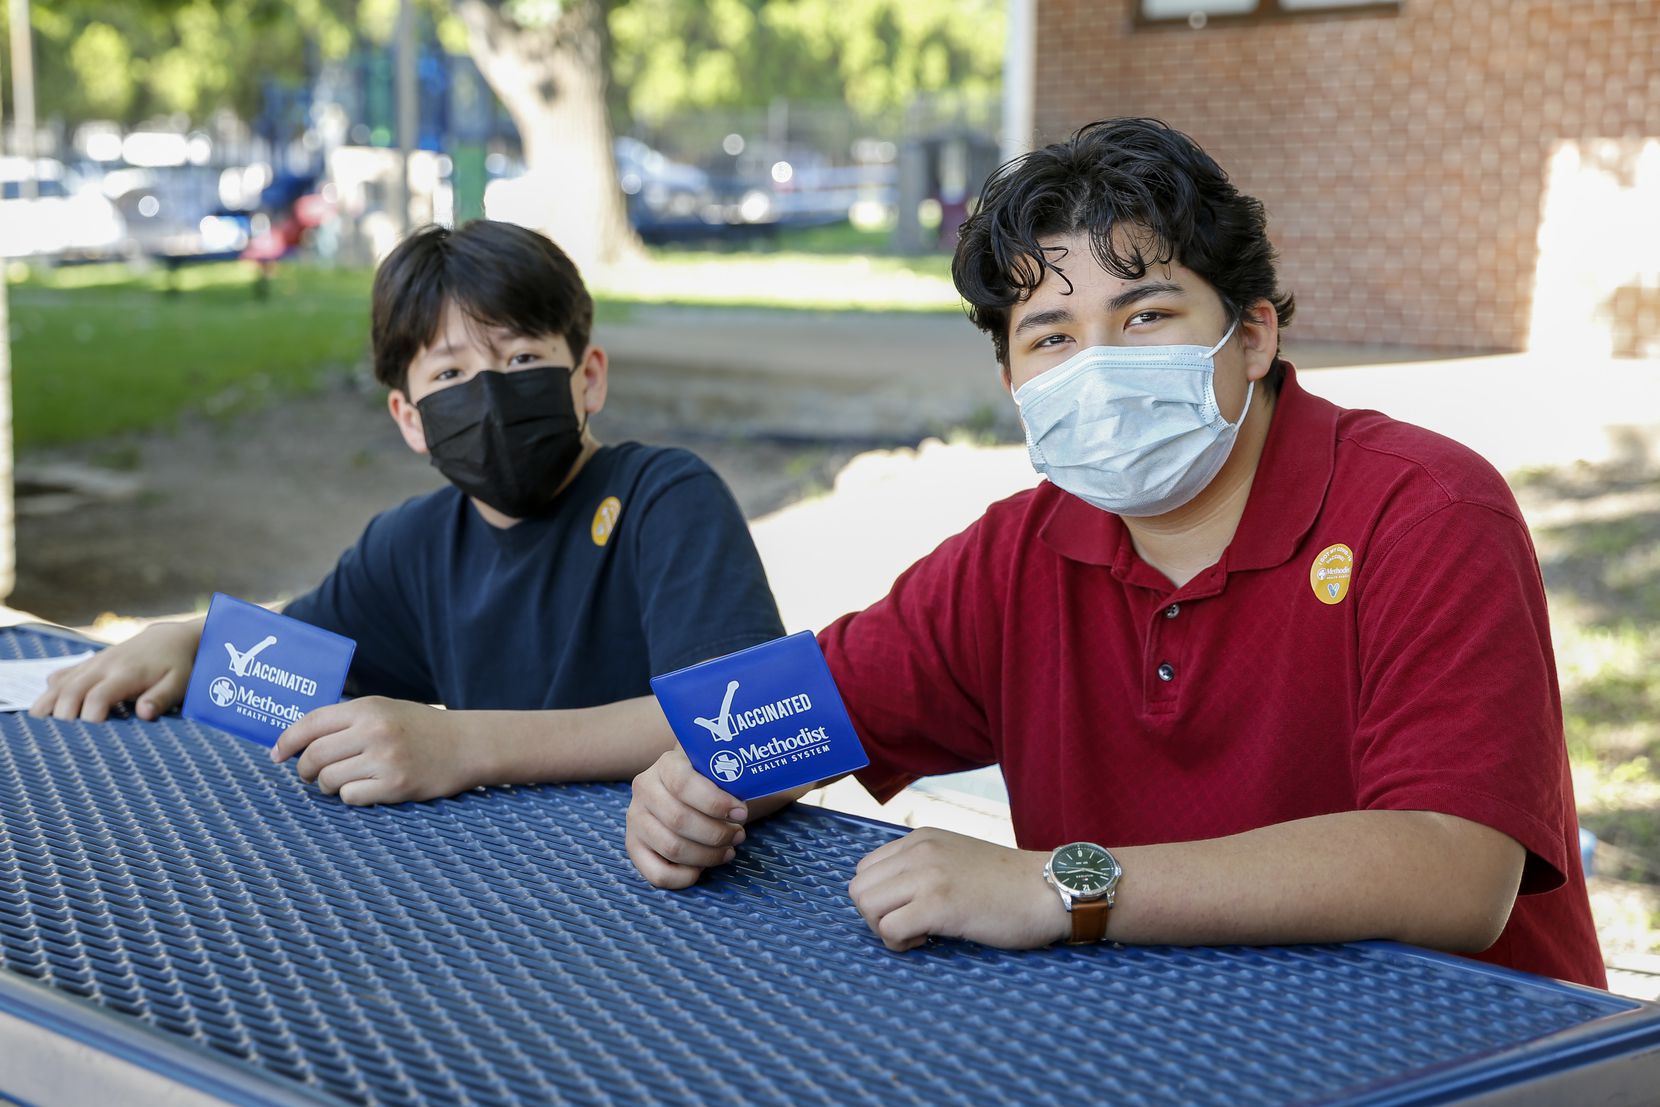 Giovany Aguado, 16, (right) pictured with his brother Joncarlo Aguado, 13, after receiving their first dose of the Pfizer COVID-19 vaccine at a vaccination clinic at St. Pius X Catholic Church on Saturday, June 19, 2021, in Dallas. 